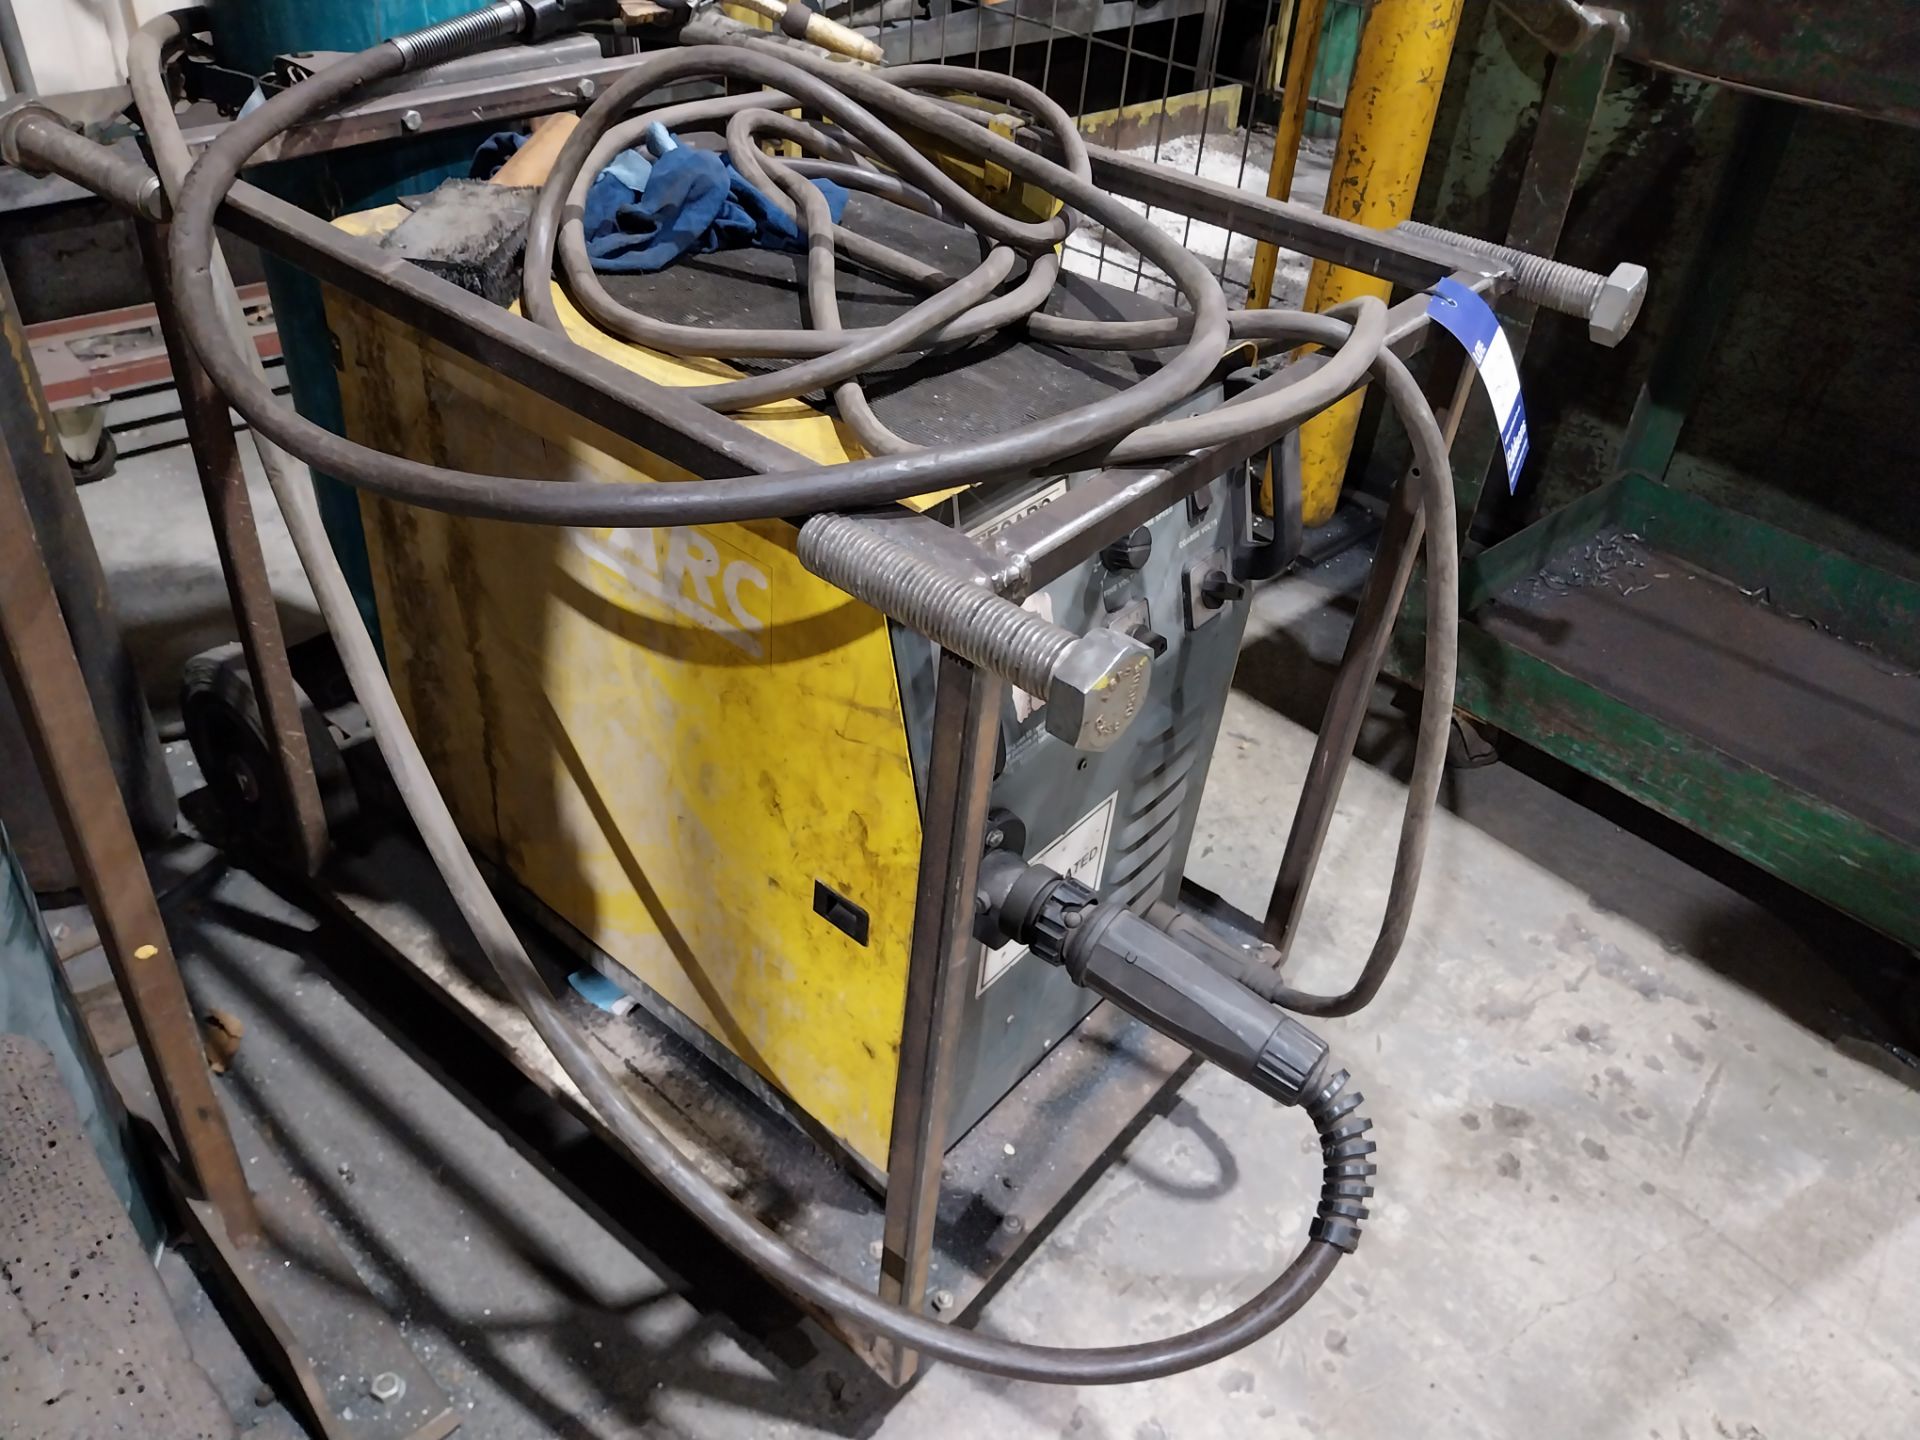 TecArc Synergic mig 423 mig welder with torch and clamp (bottle not included)